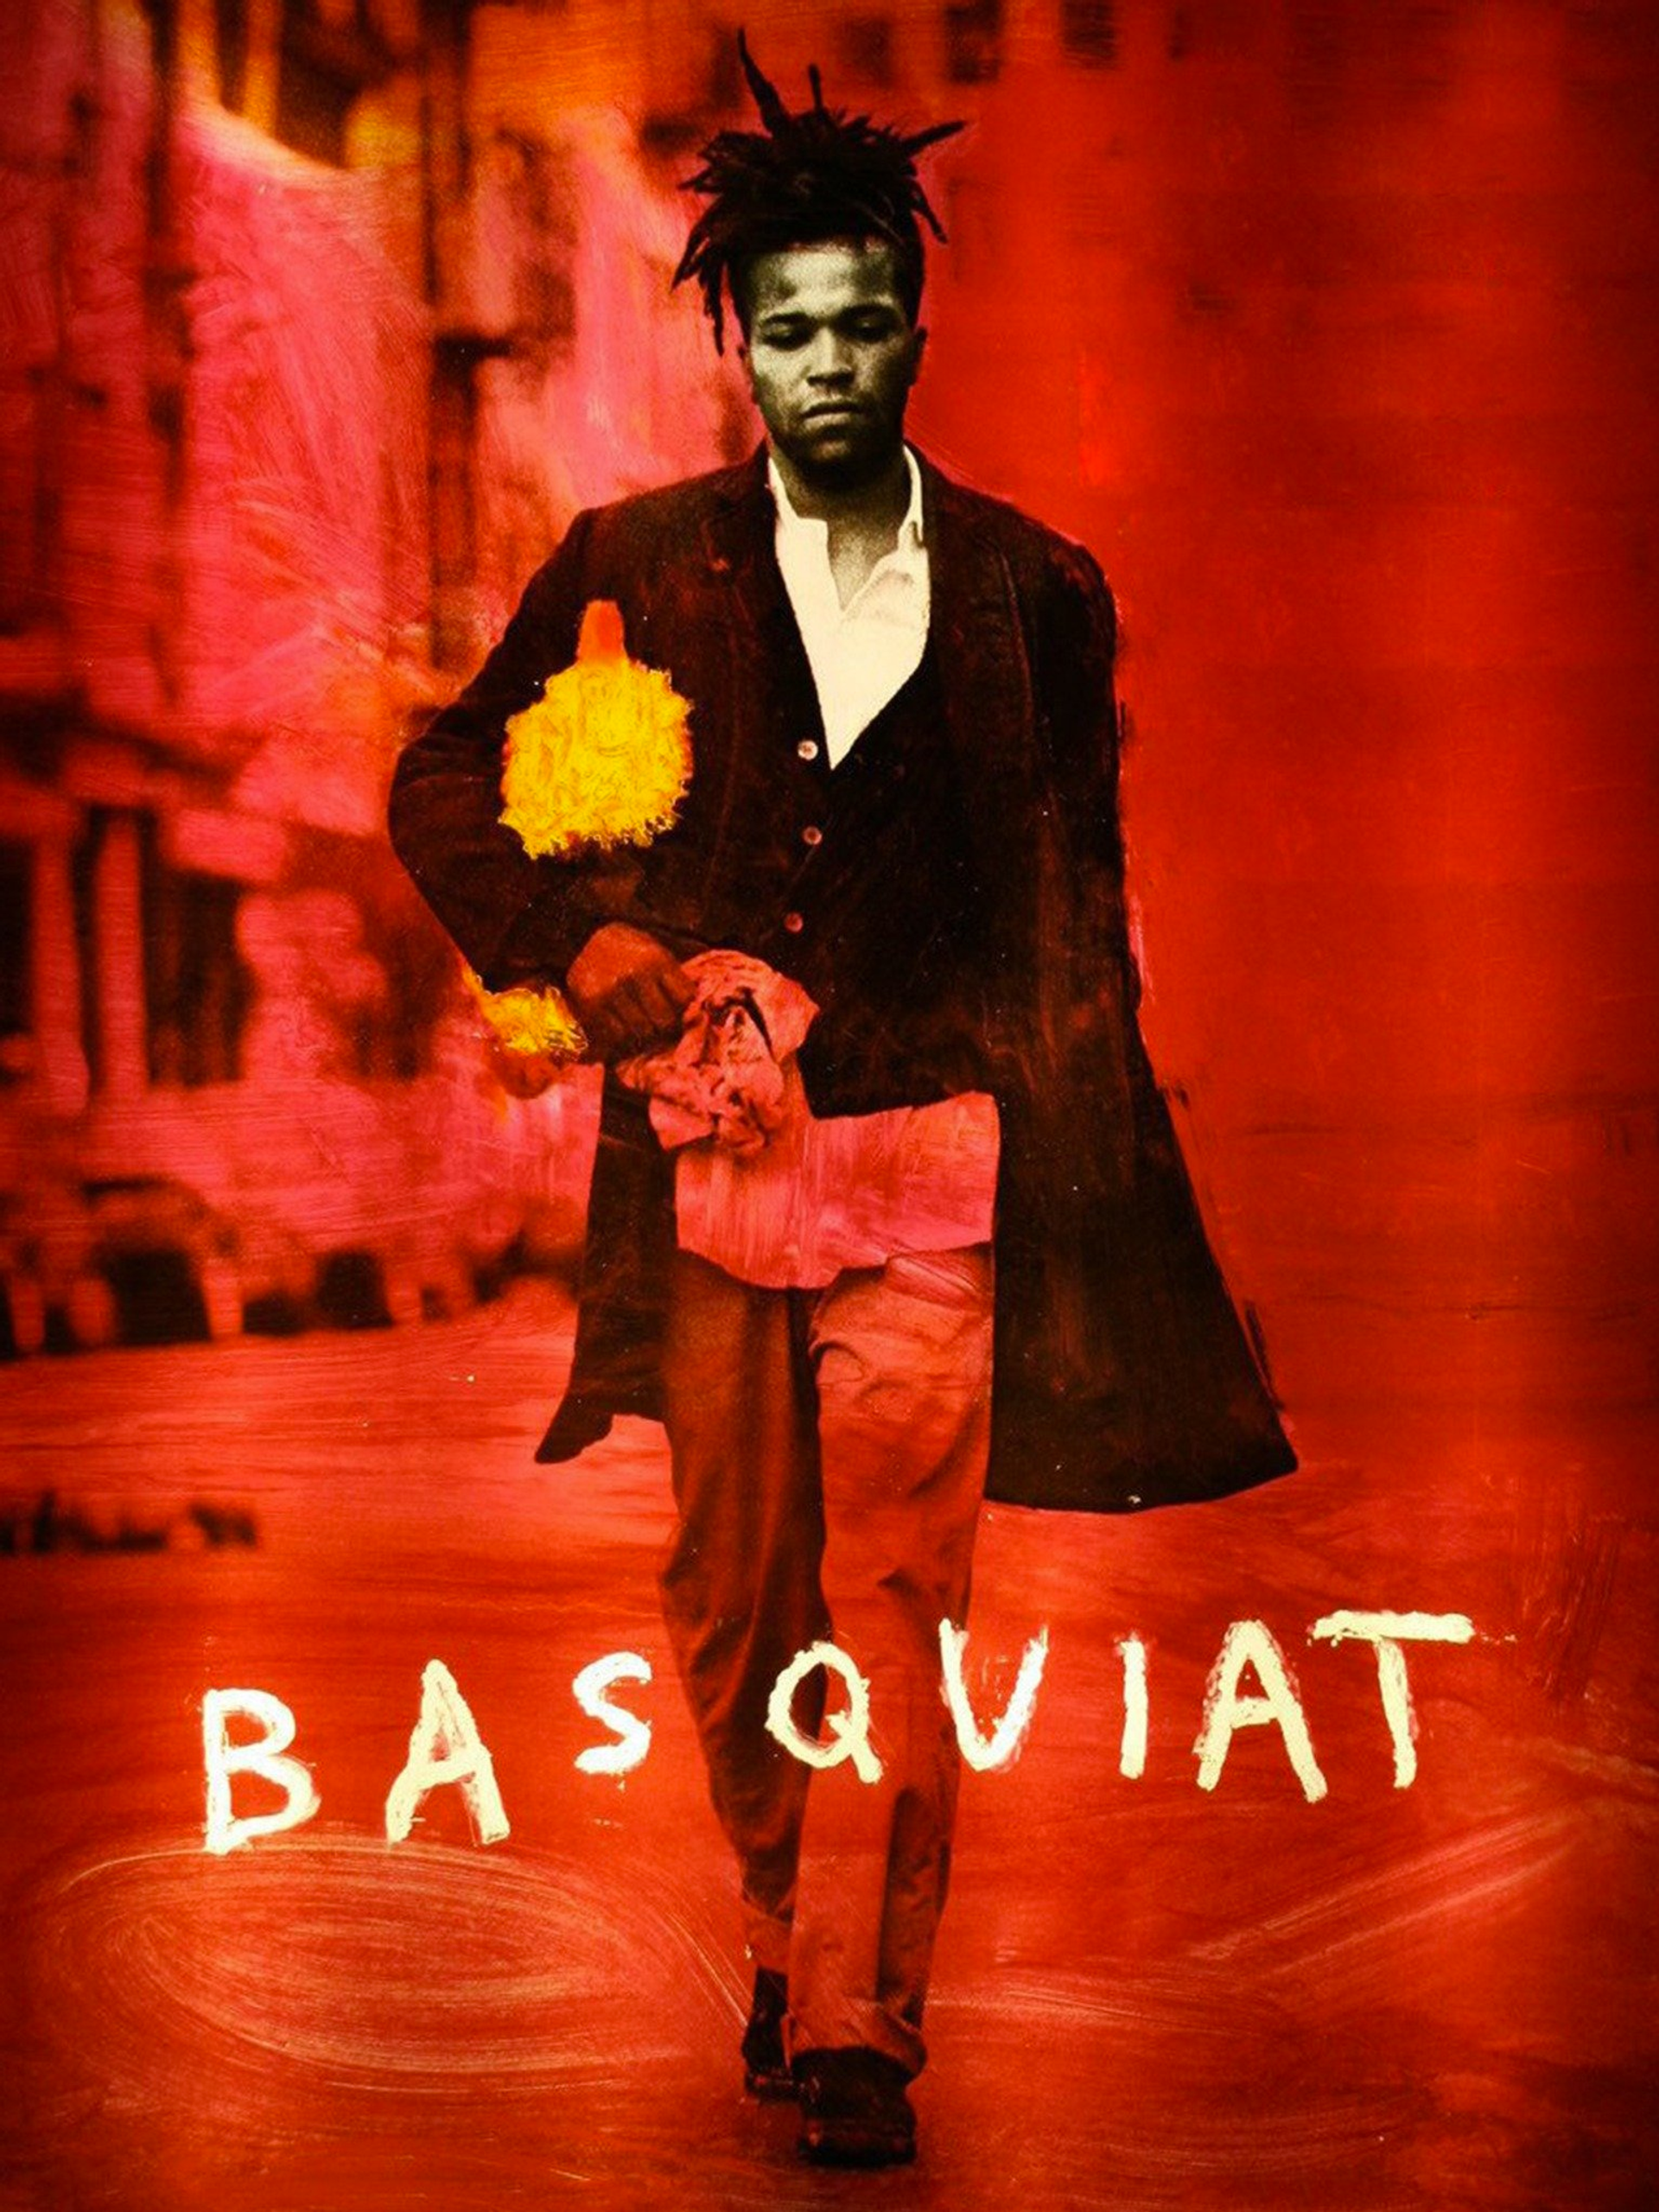 An image of the poster for Basquiat (1996) by Julian Schnabel. It shows the artist, depicted in monochrome, walking the streets of New York against a red background.